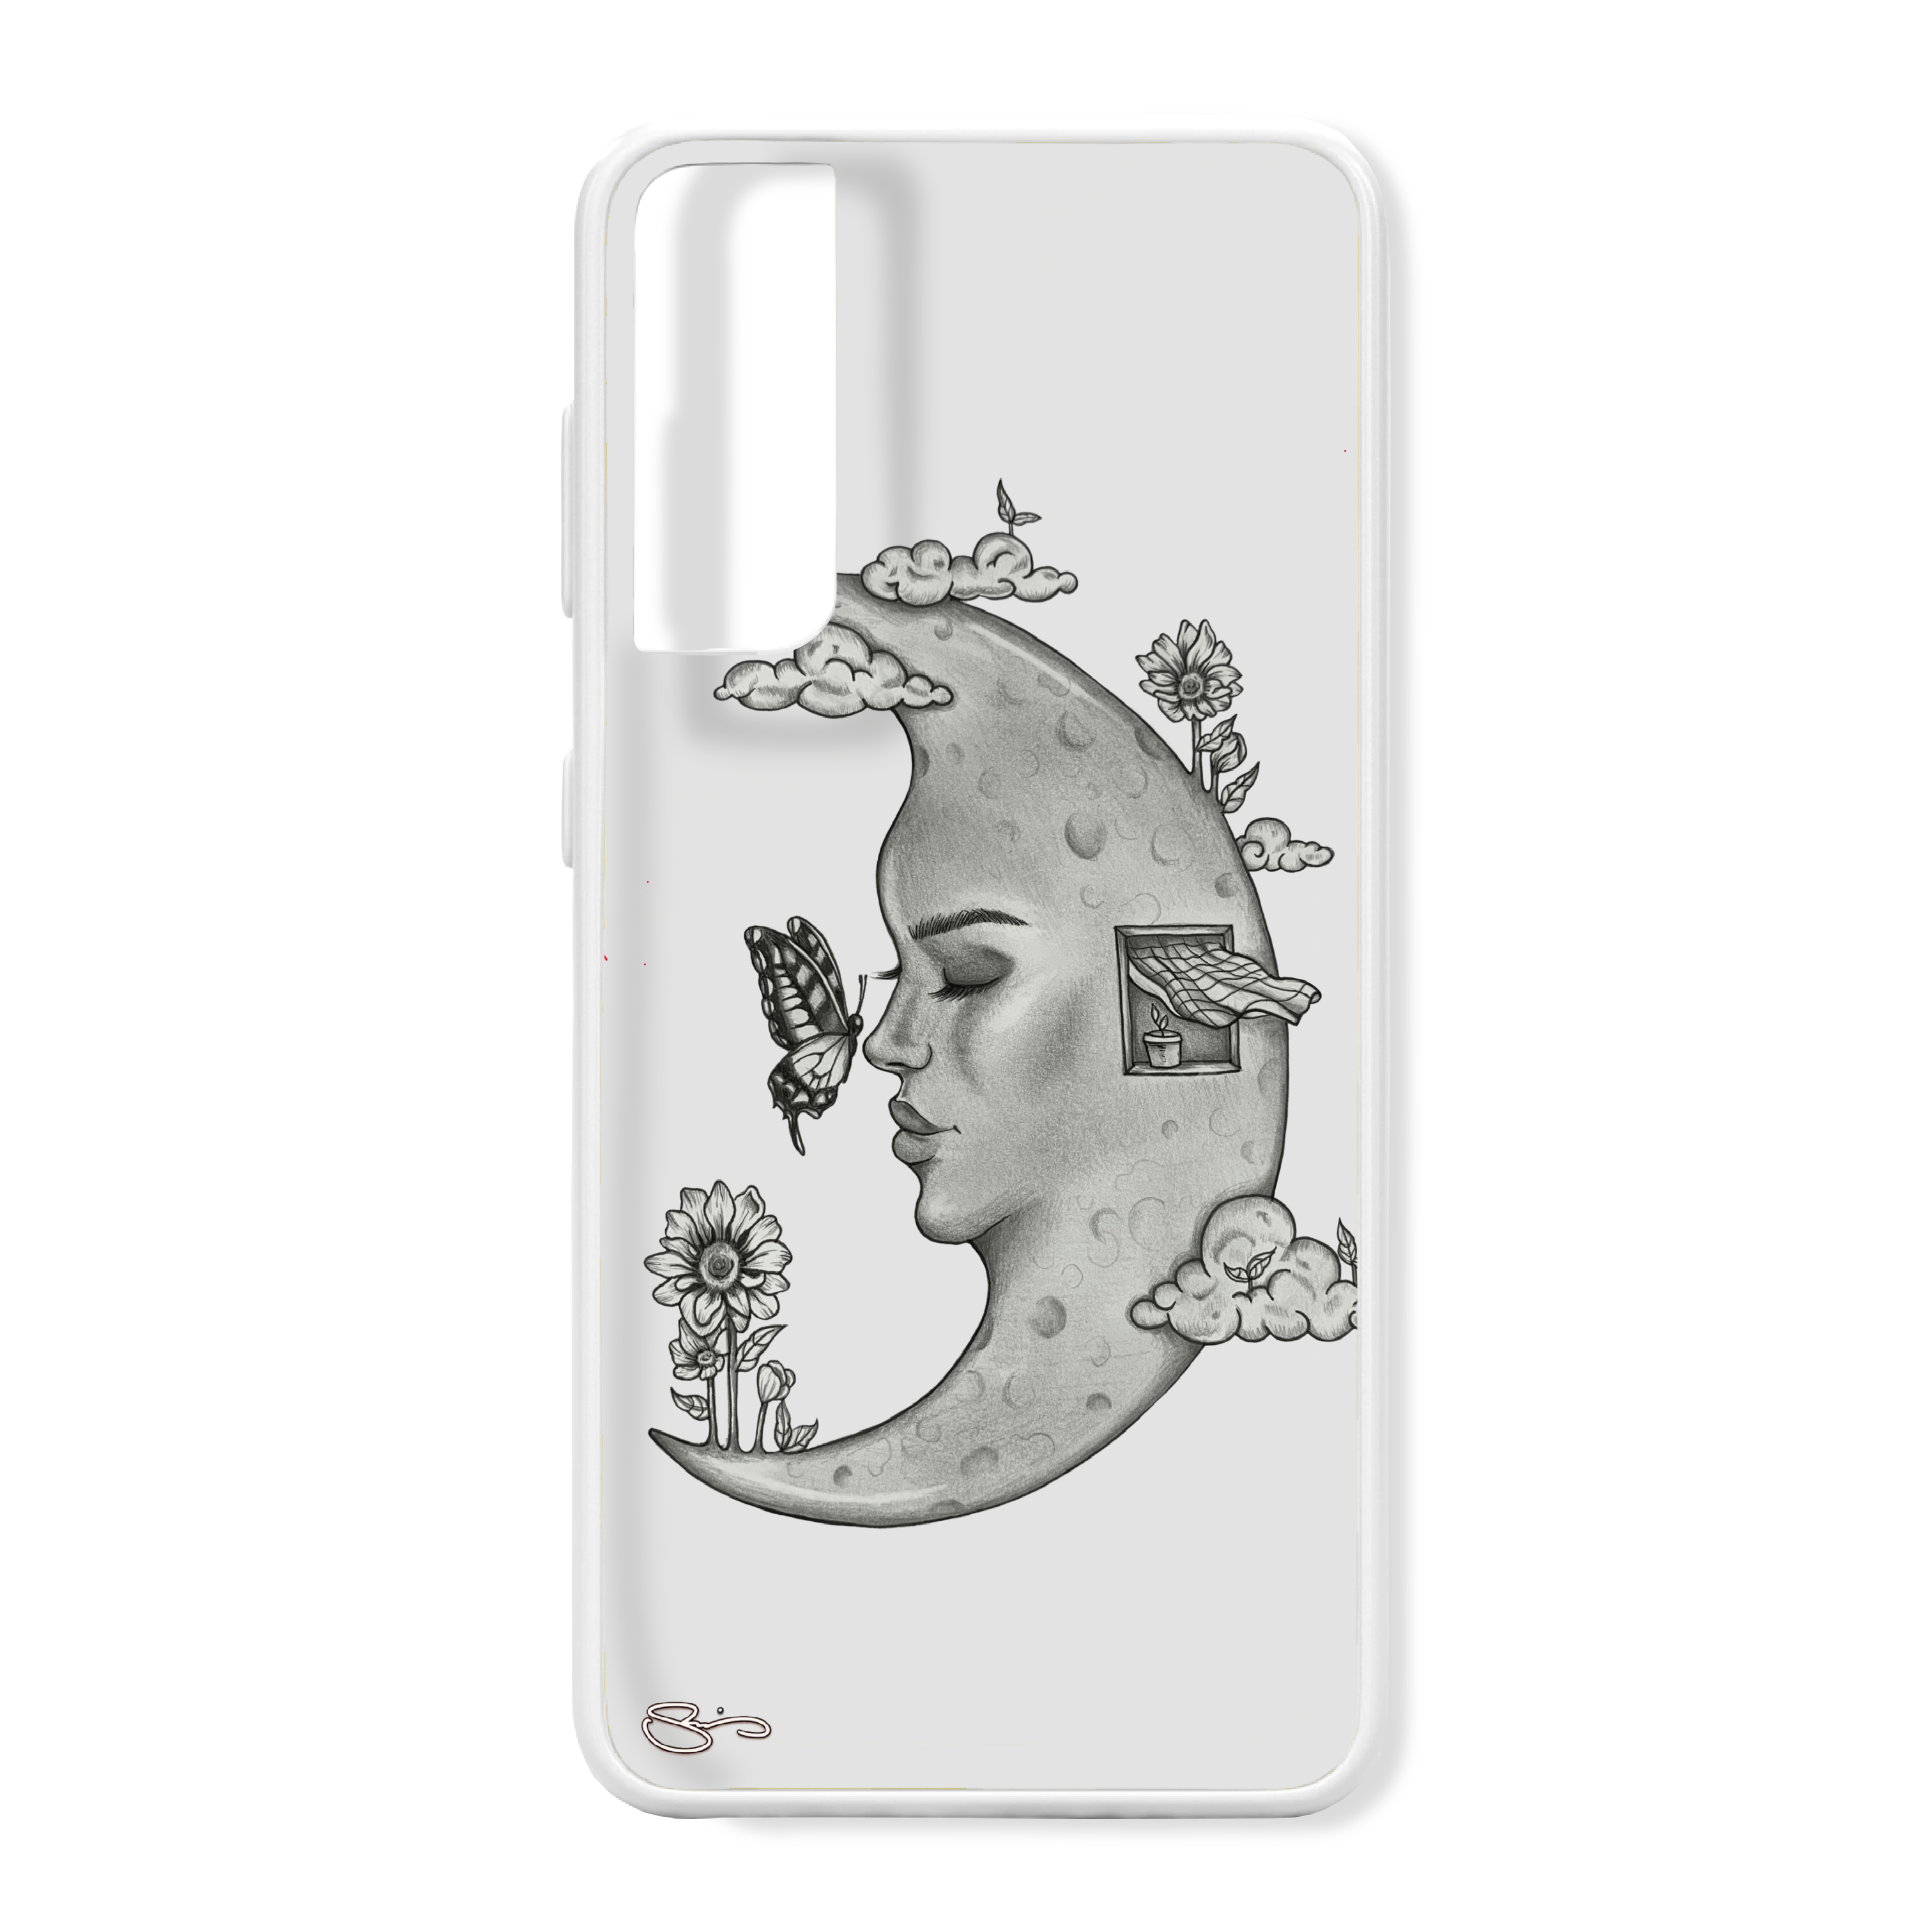 The Thoughtful Moon Samsung Case